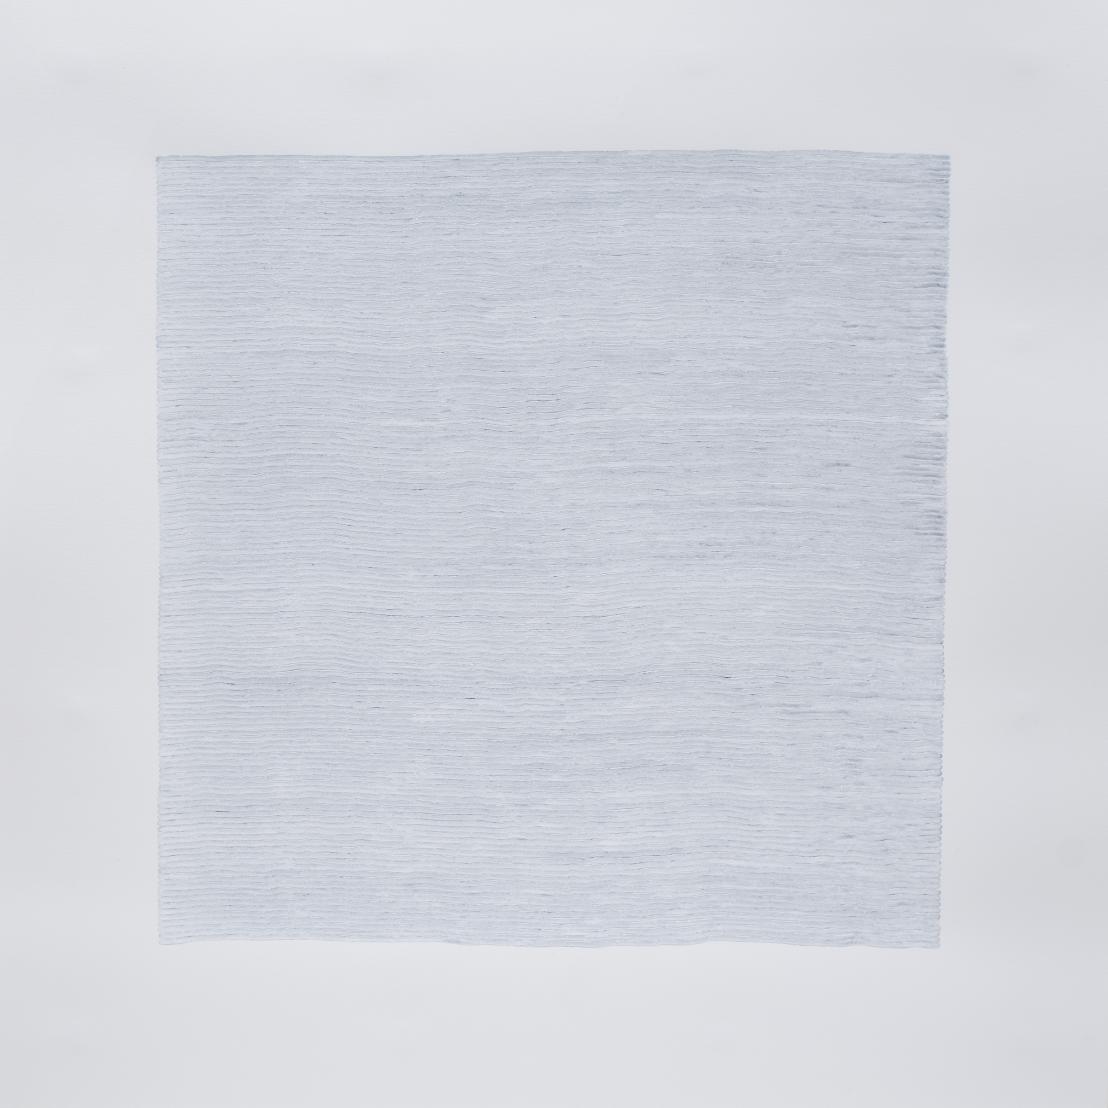 David Connearn, Five White Drawings S2 – Drawing 2, 42 x 42 cm, 2021